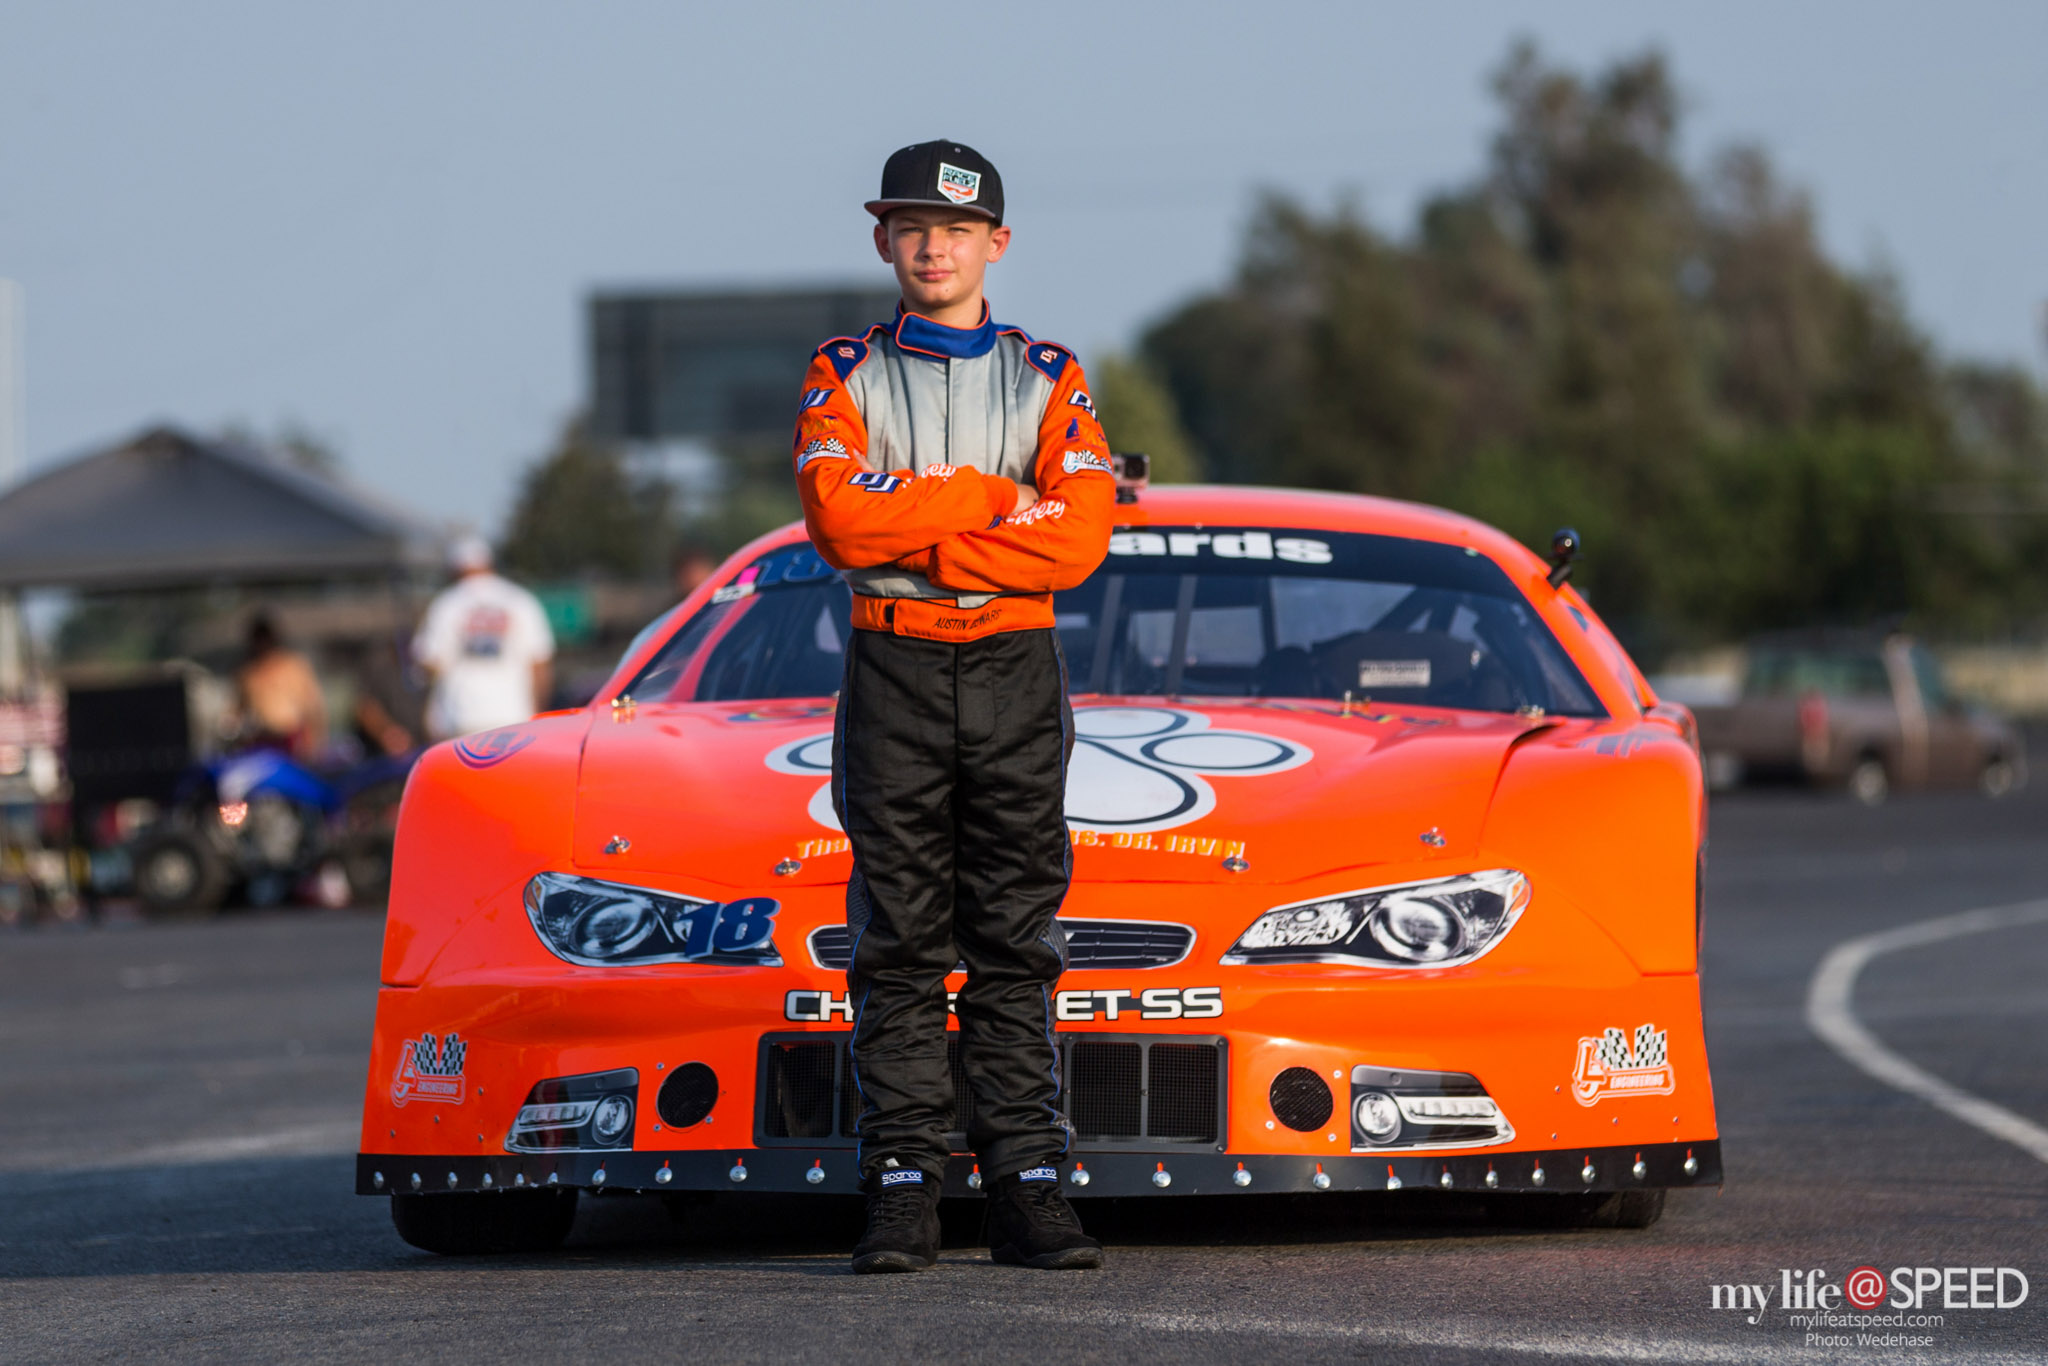 Austin Edwards, 11-year-old Junior Late Model driver